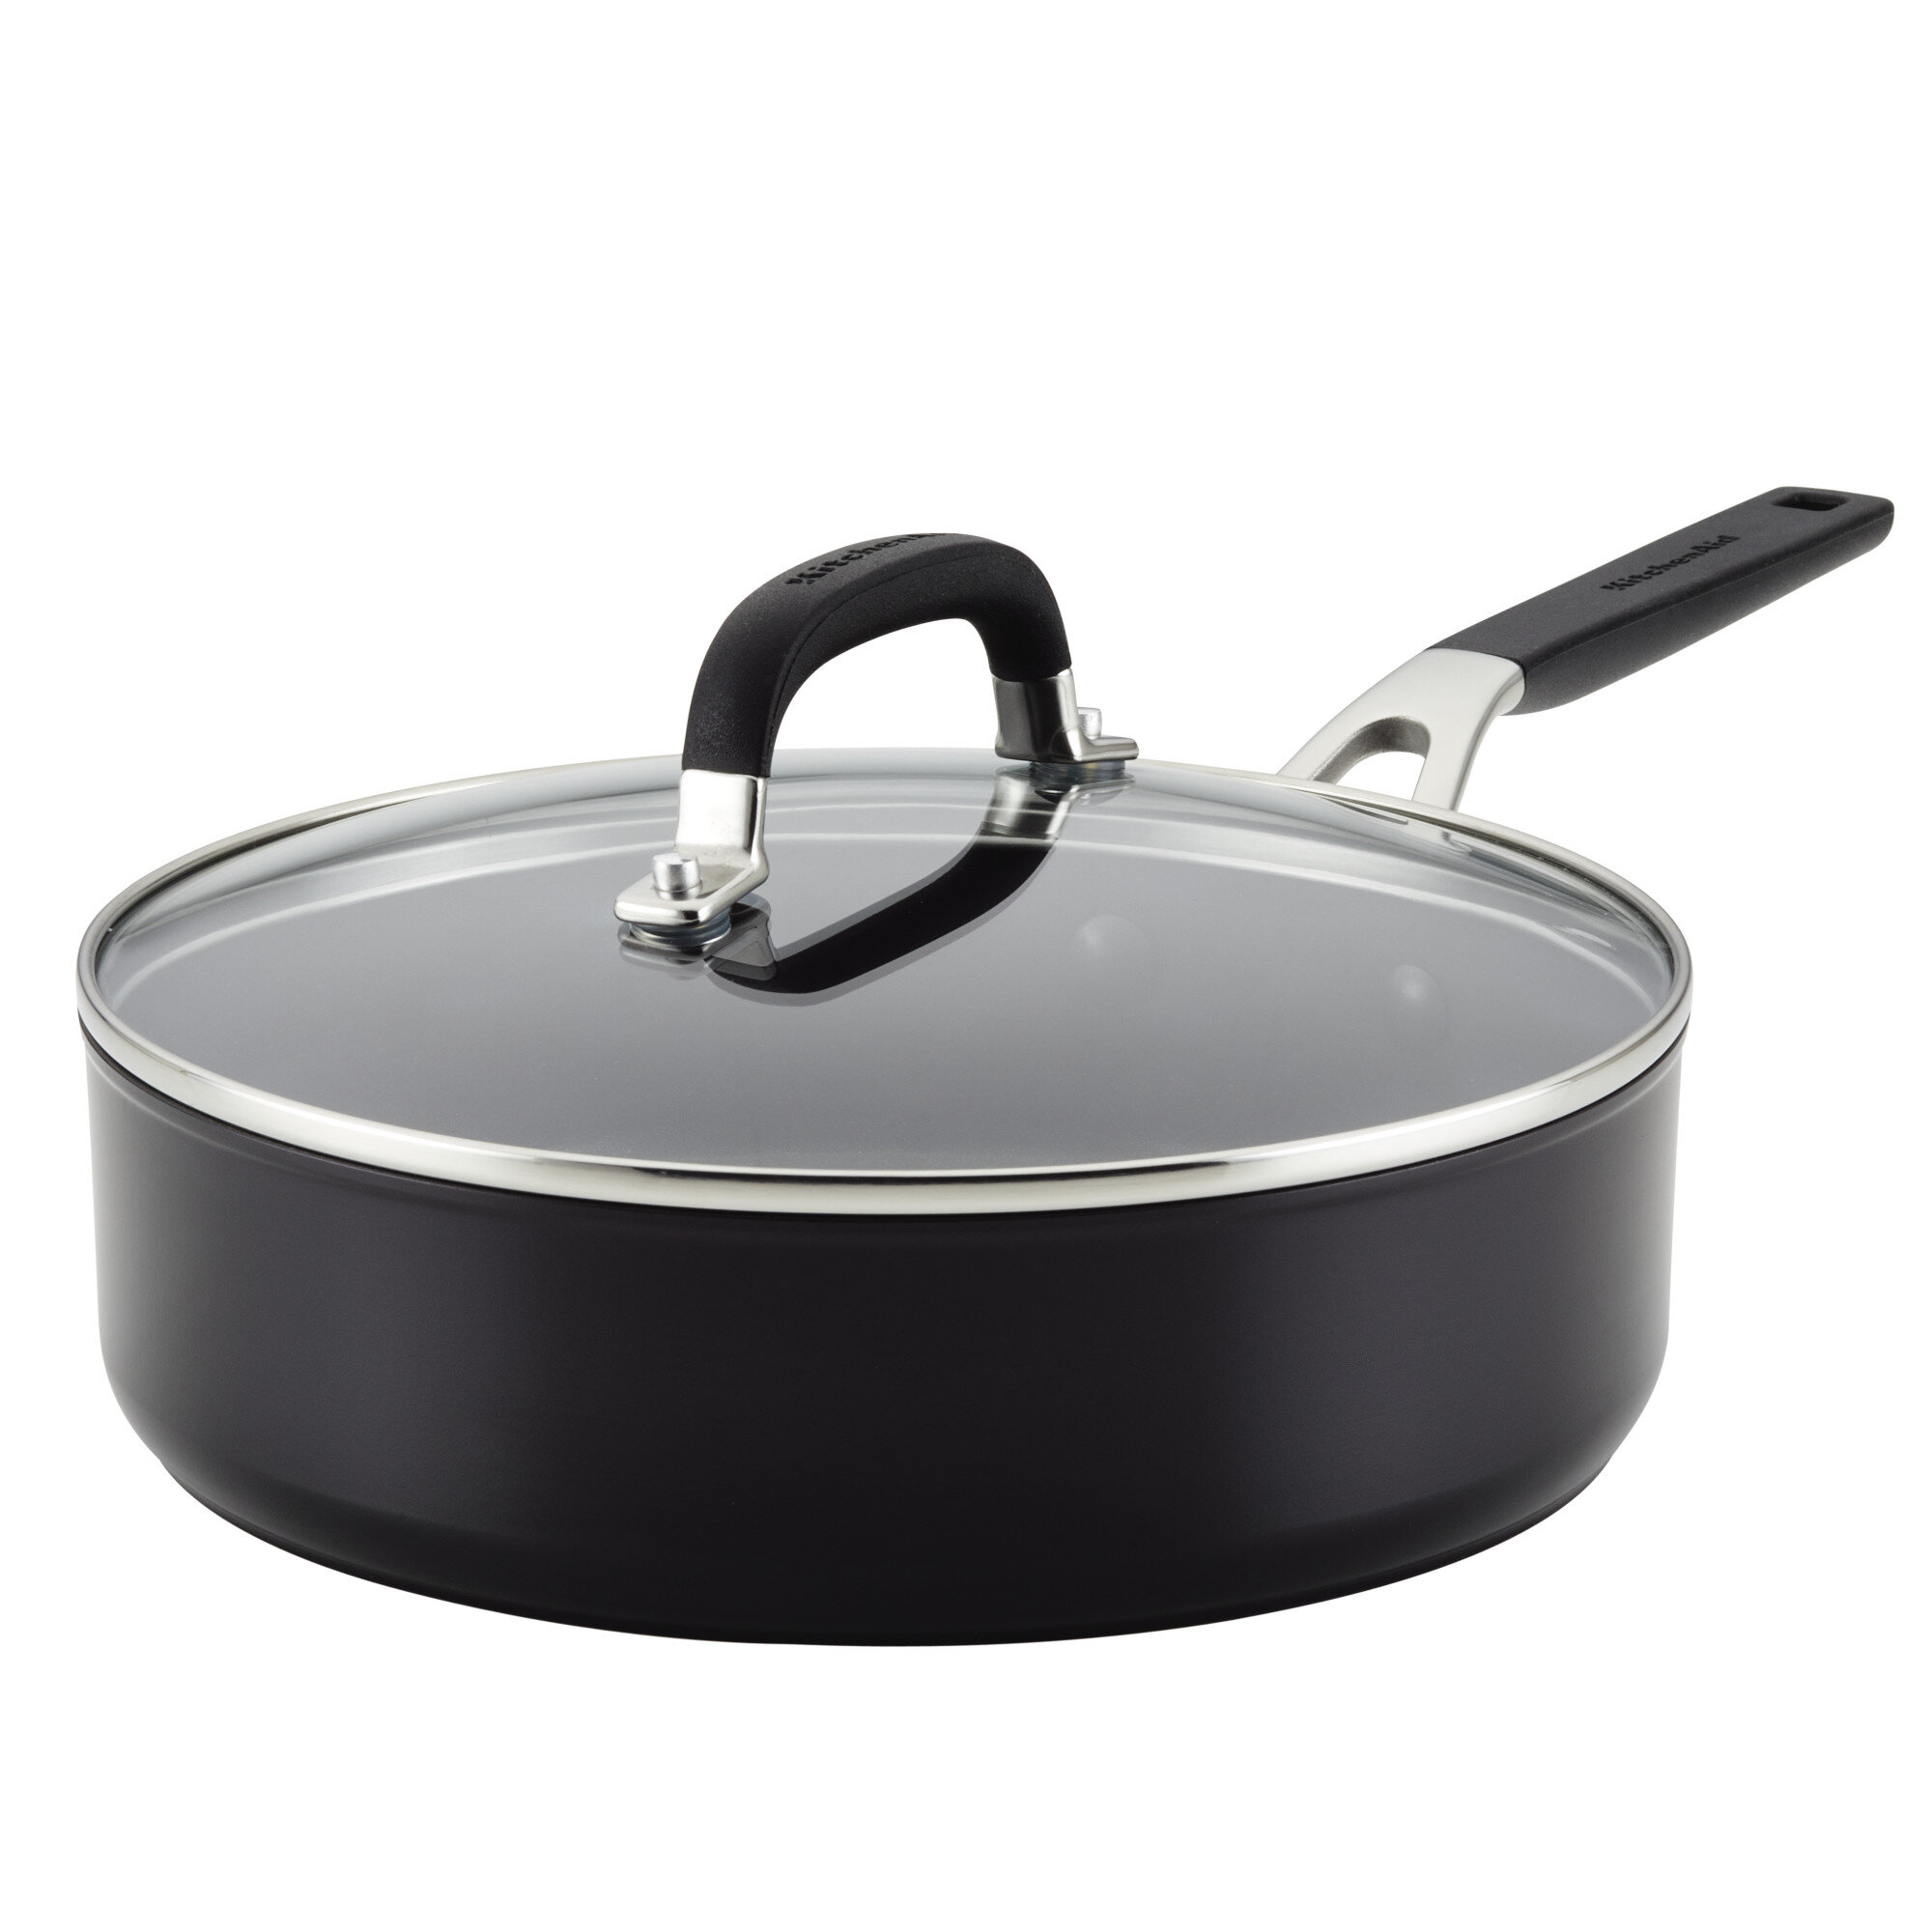  T-fal Specialty Nonstick Saute Pan with Glass Lid 5